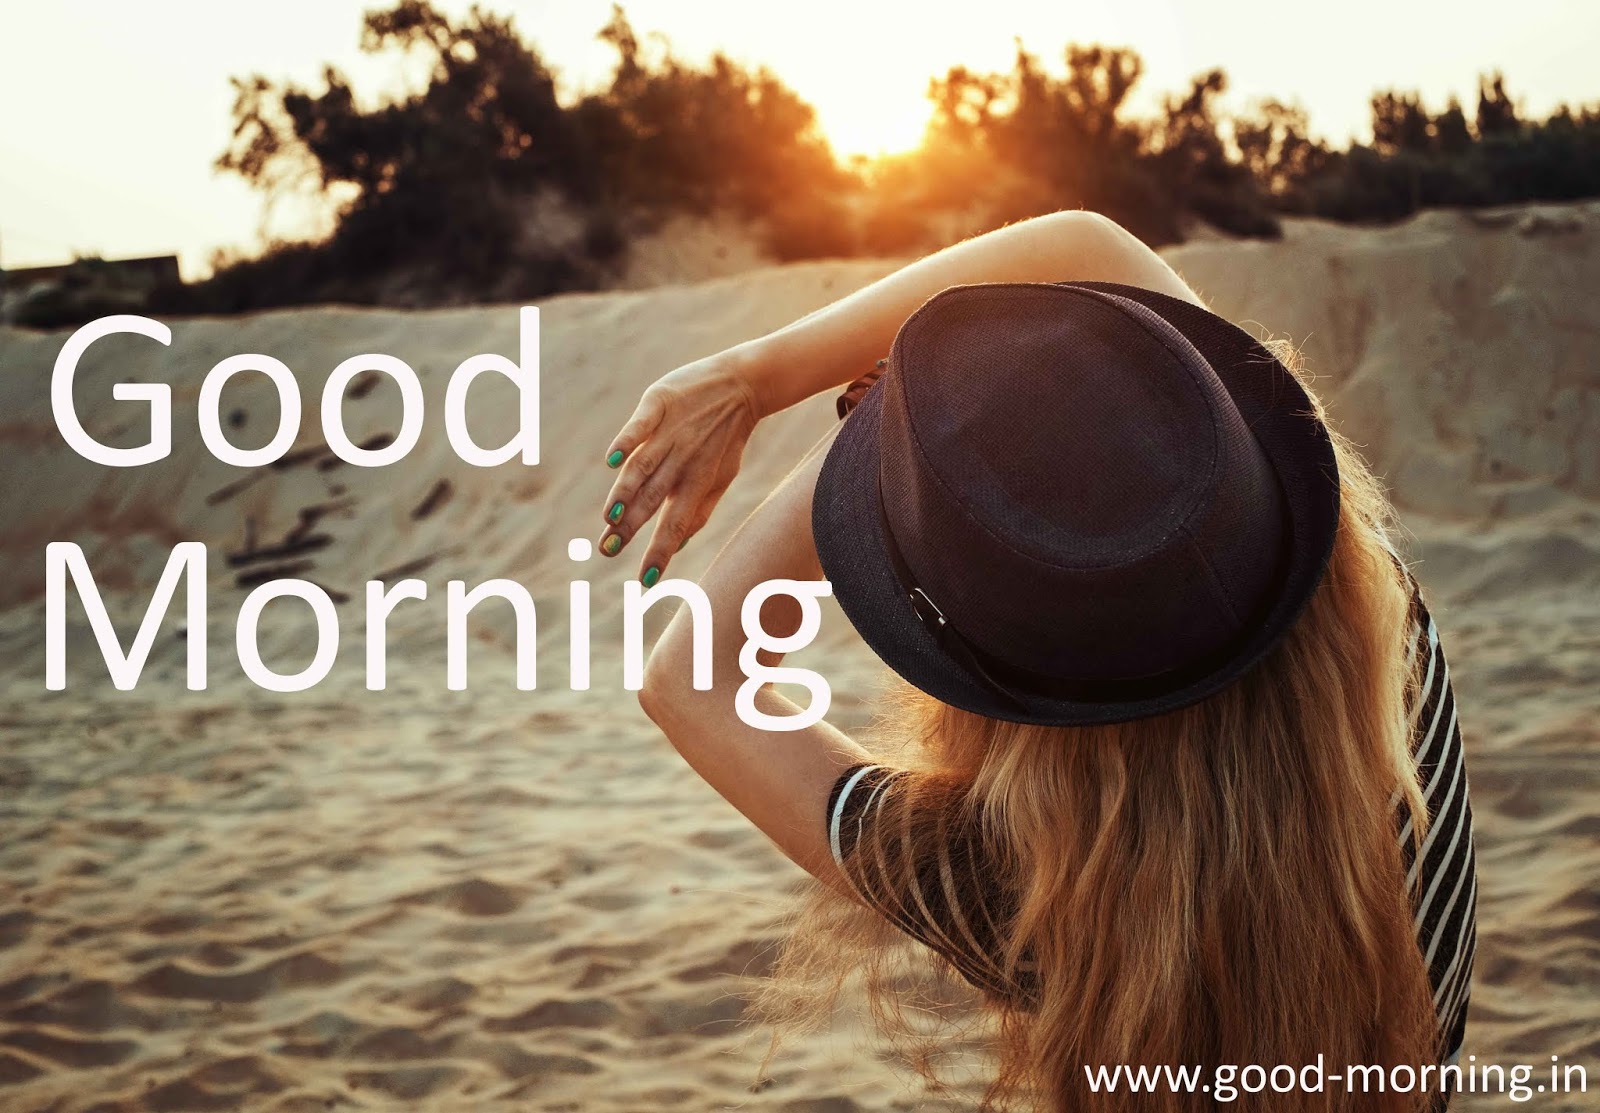 Latest Good Morning Images Wallpaper Photo Pics Hd - High Quality Good Morning Hd - HD Wallpaper 